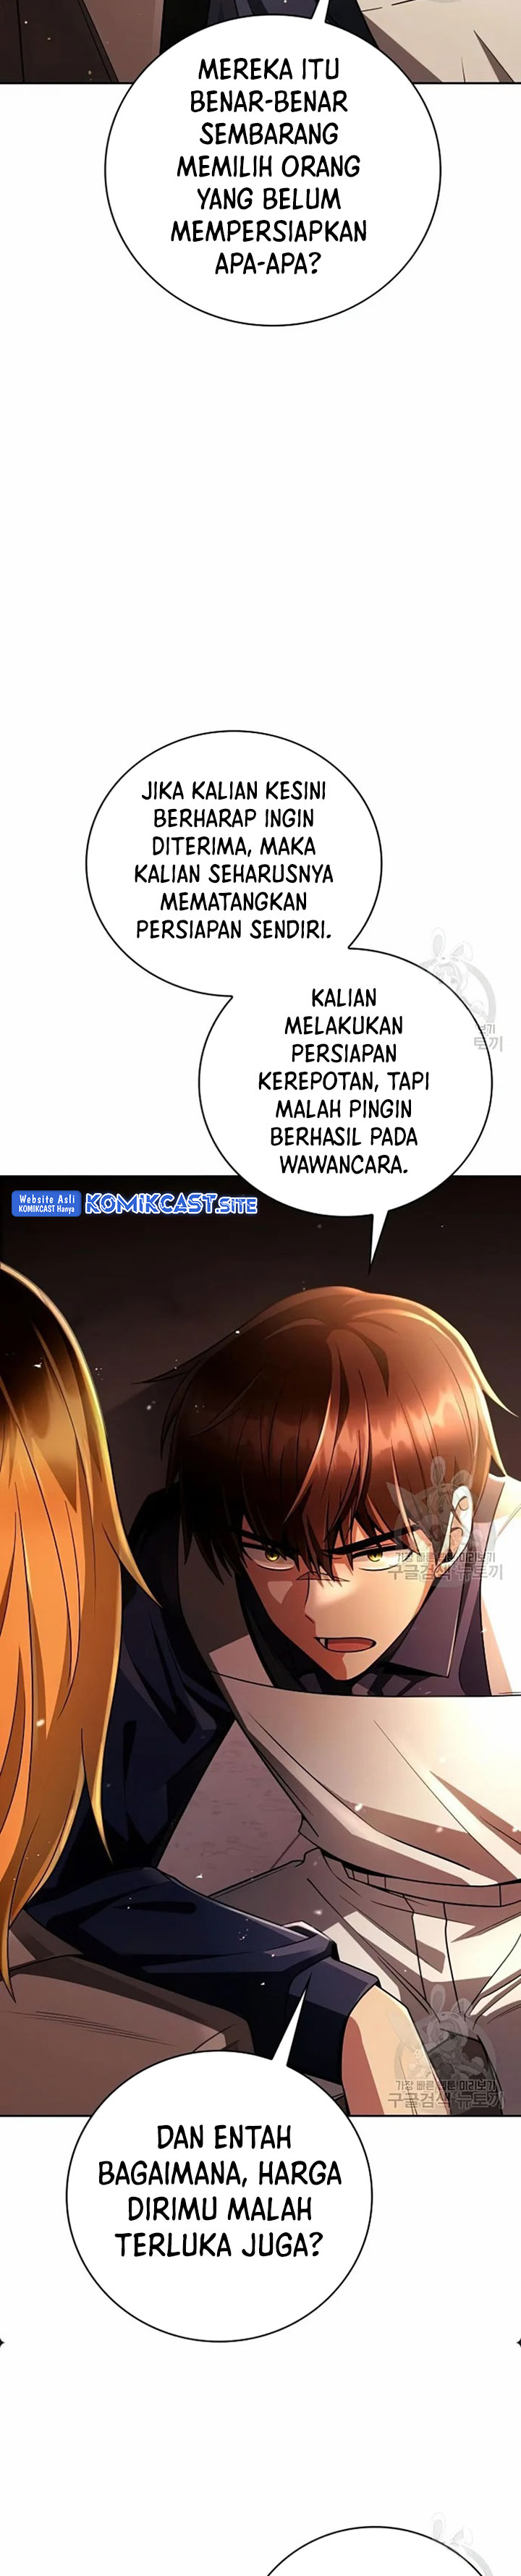 Dilarang COPAS - situs resmi www.mangacanblog.com - Komik clever cleaning life of the returned genius hunter 029 - chapter 29 30 Indonesia clever cleaning life of the returned genius hunter 029 - chapter 29 Terbaru 20|Baca Manga Komik Indonesia|Mangacan